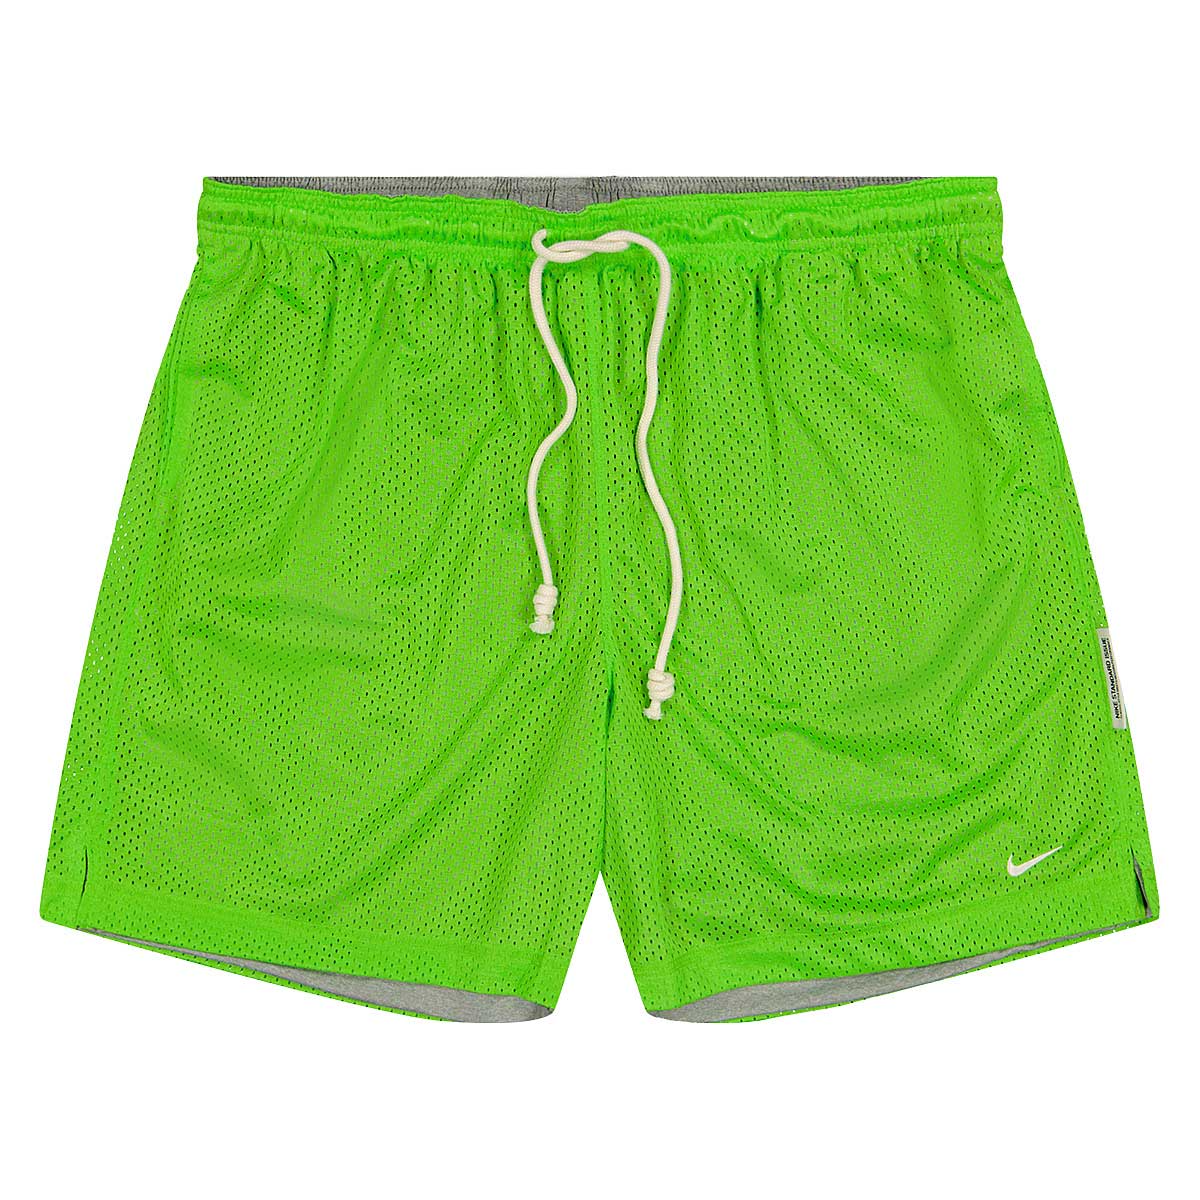 Nearly 50% OFF the Nike Standard Issue Mesh Shorts 